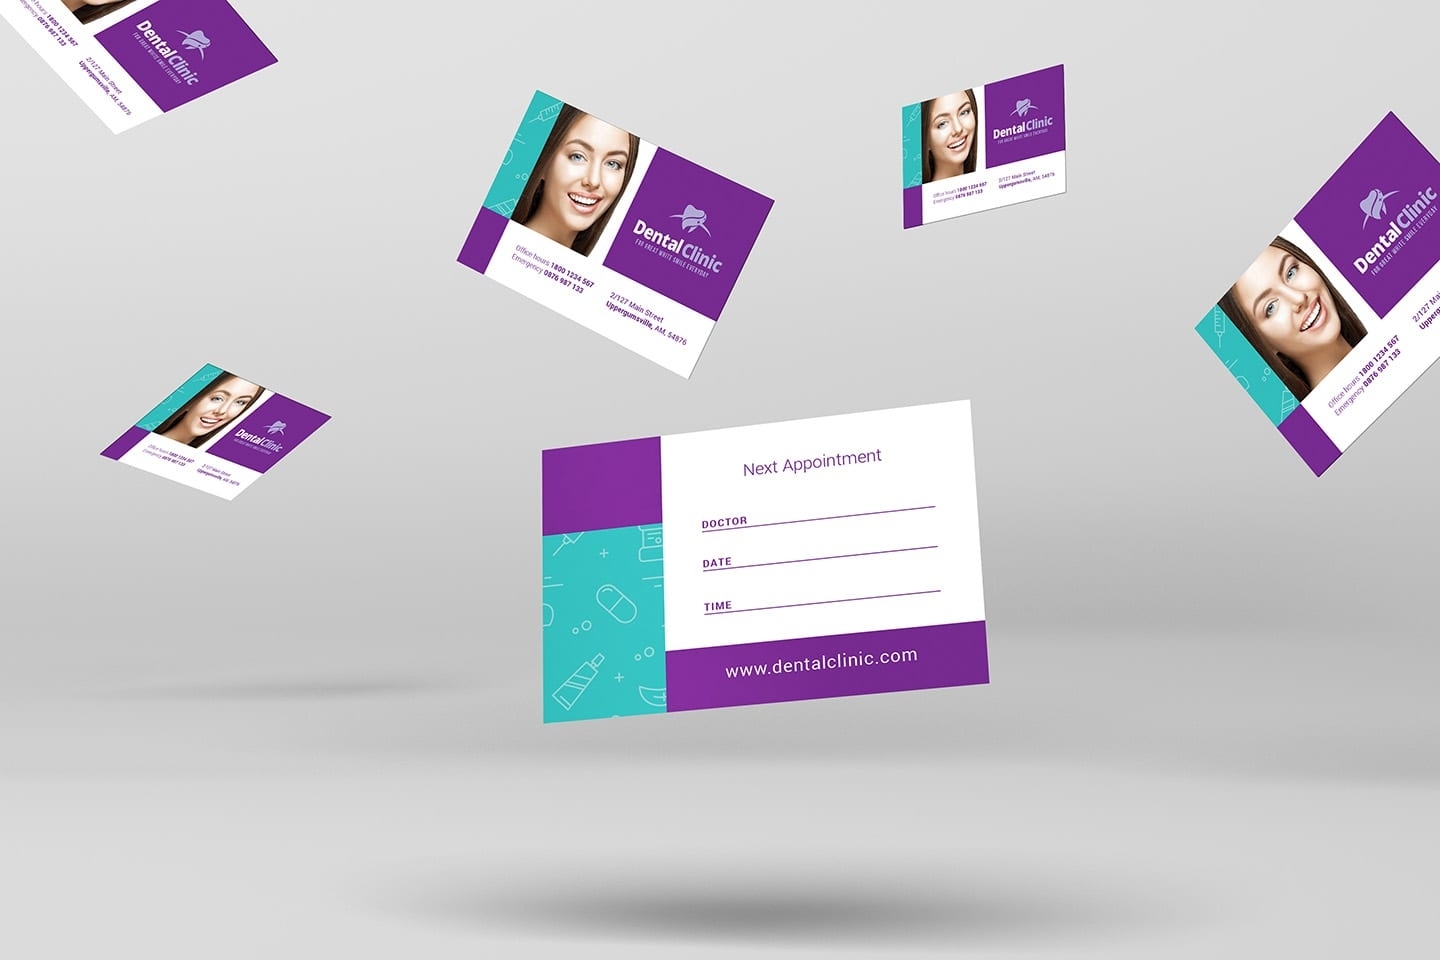 Dental Clinic Appointment Card Template In Psd, Ai &amp; Vector - Brandpacks within Dentist Appointment Card Template